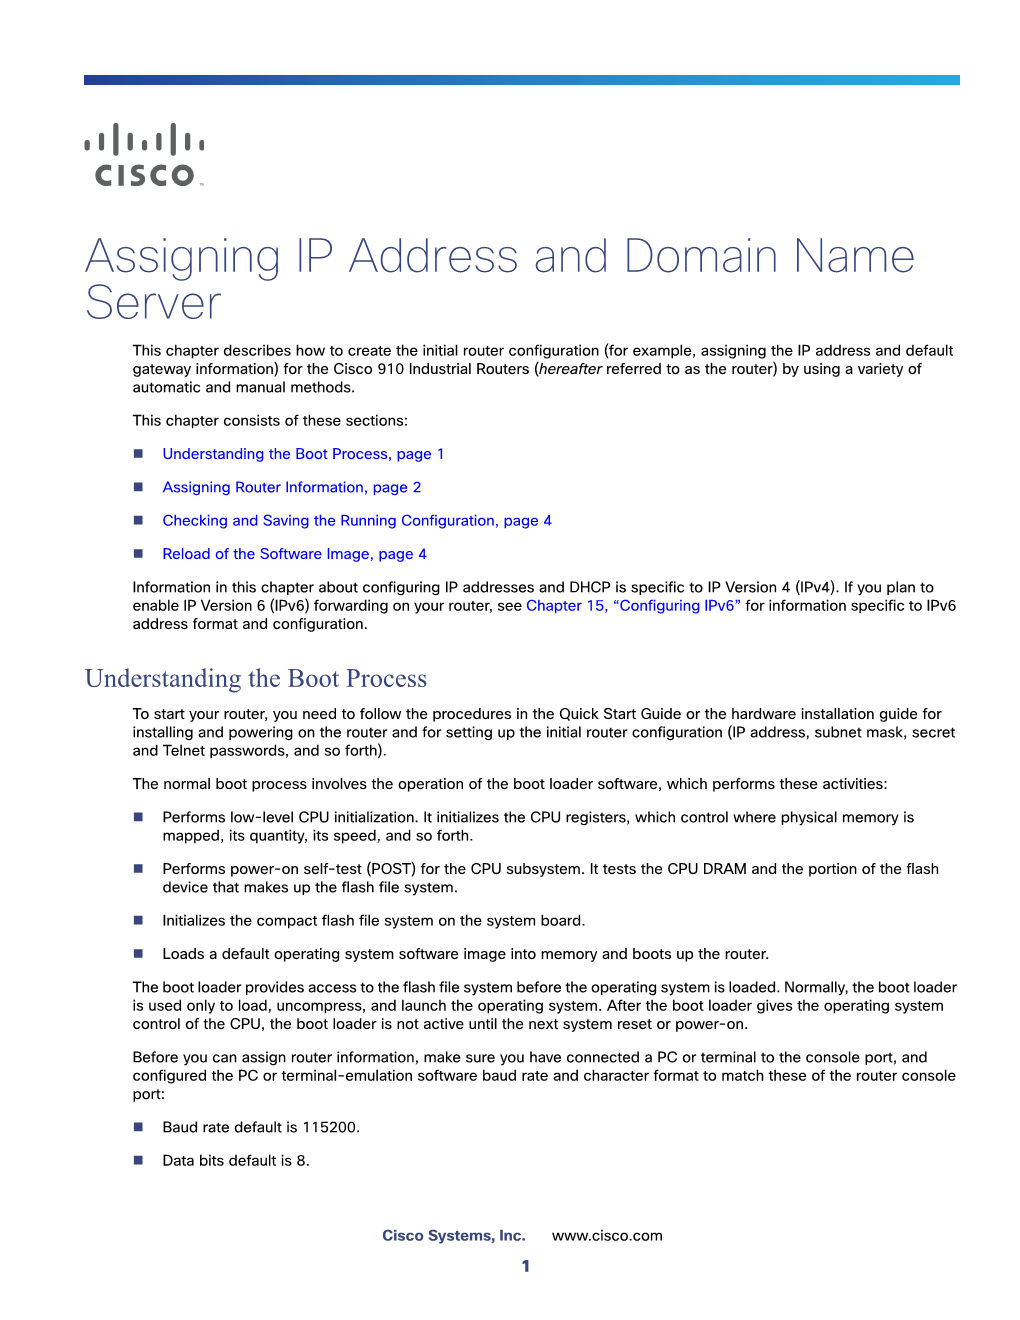 Chapter 4, “Assigning IP Address and Domain Name Server.”